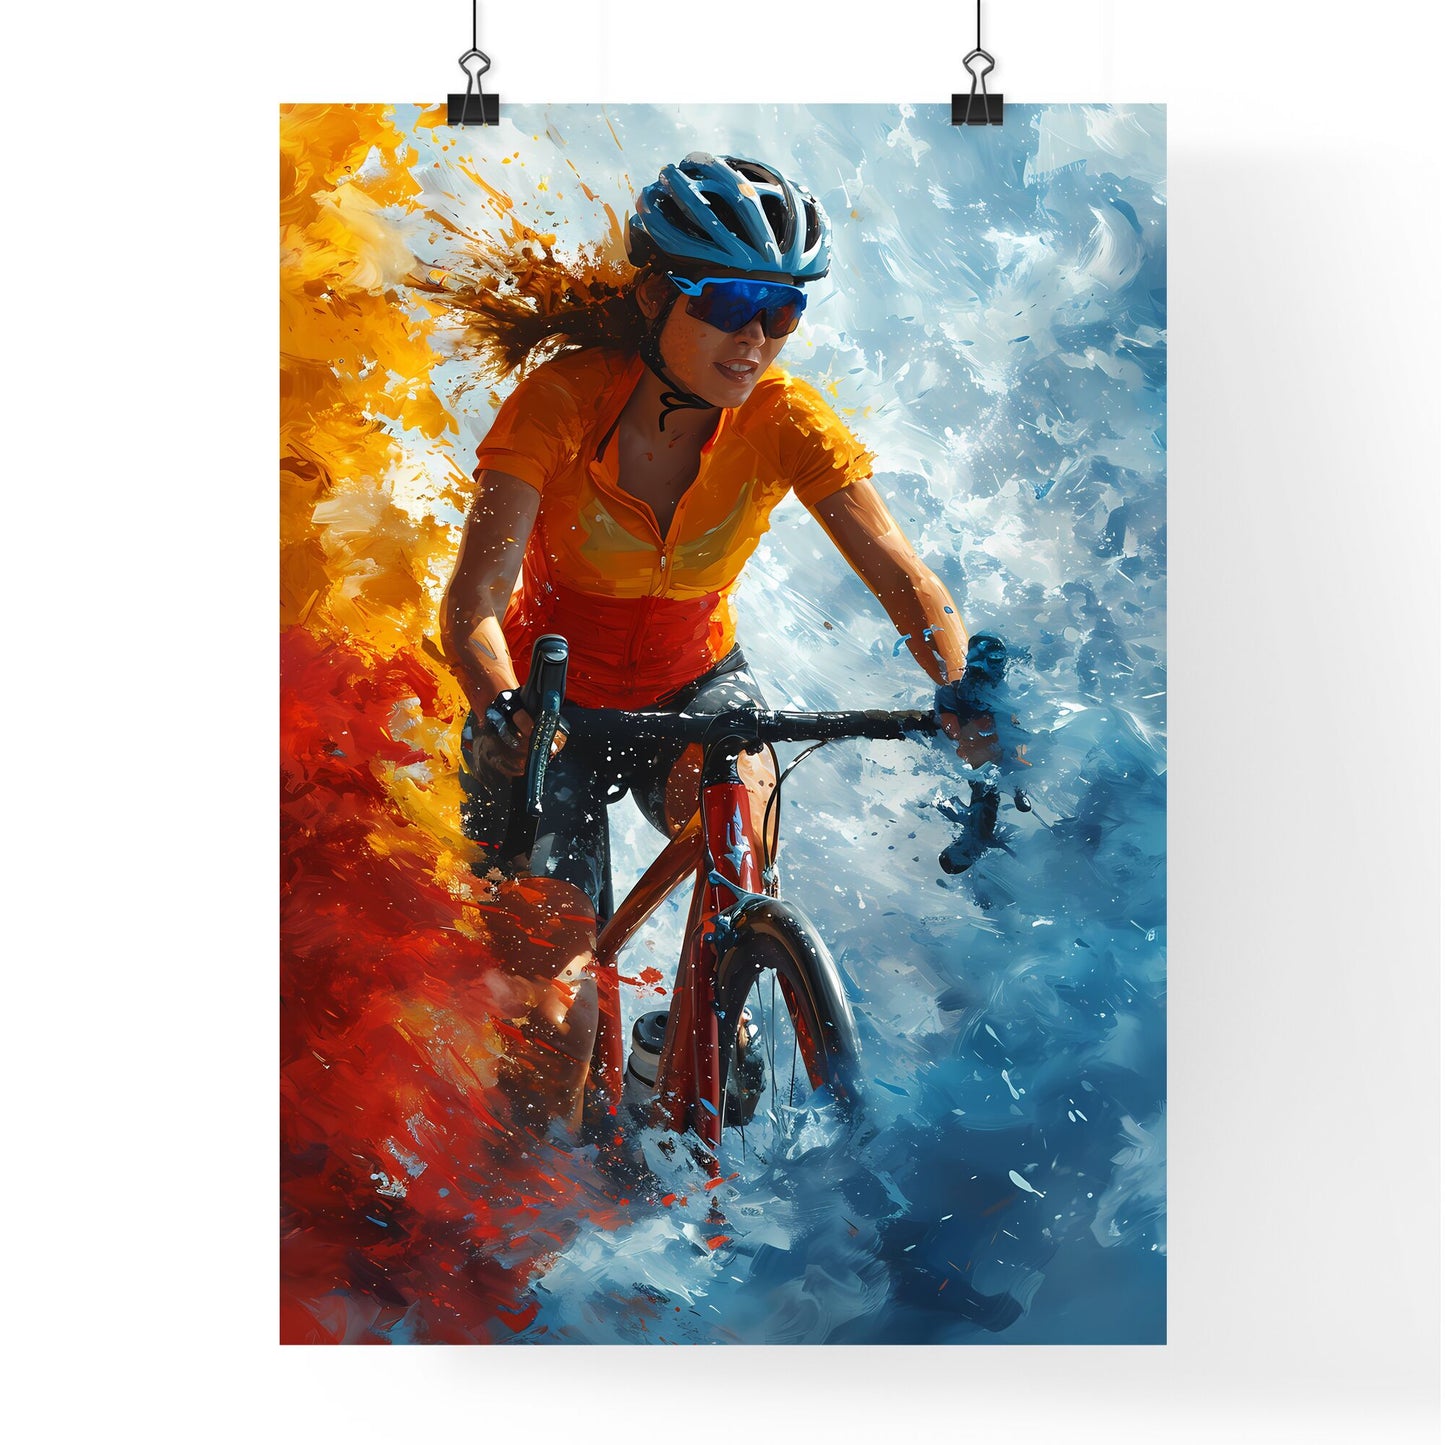 A Poster of an art illustration of a triathlon - A Woman Riding A Bike In A Colorful Explosion Default Title